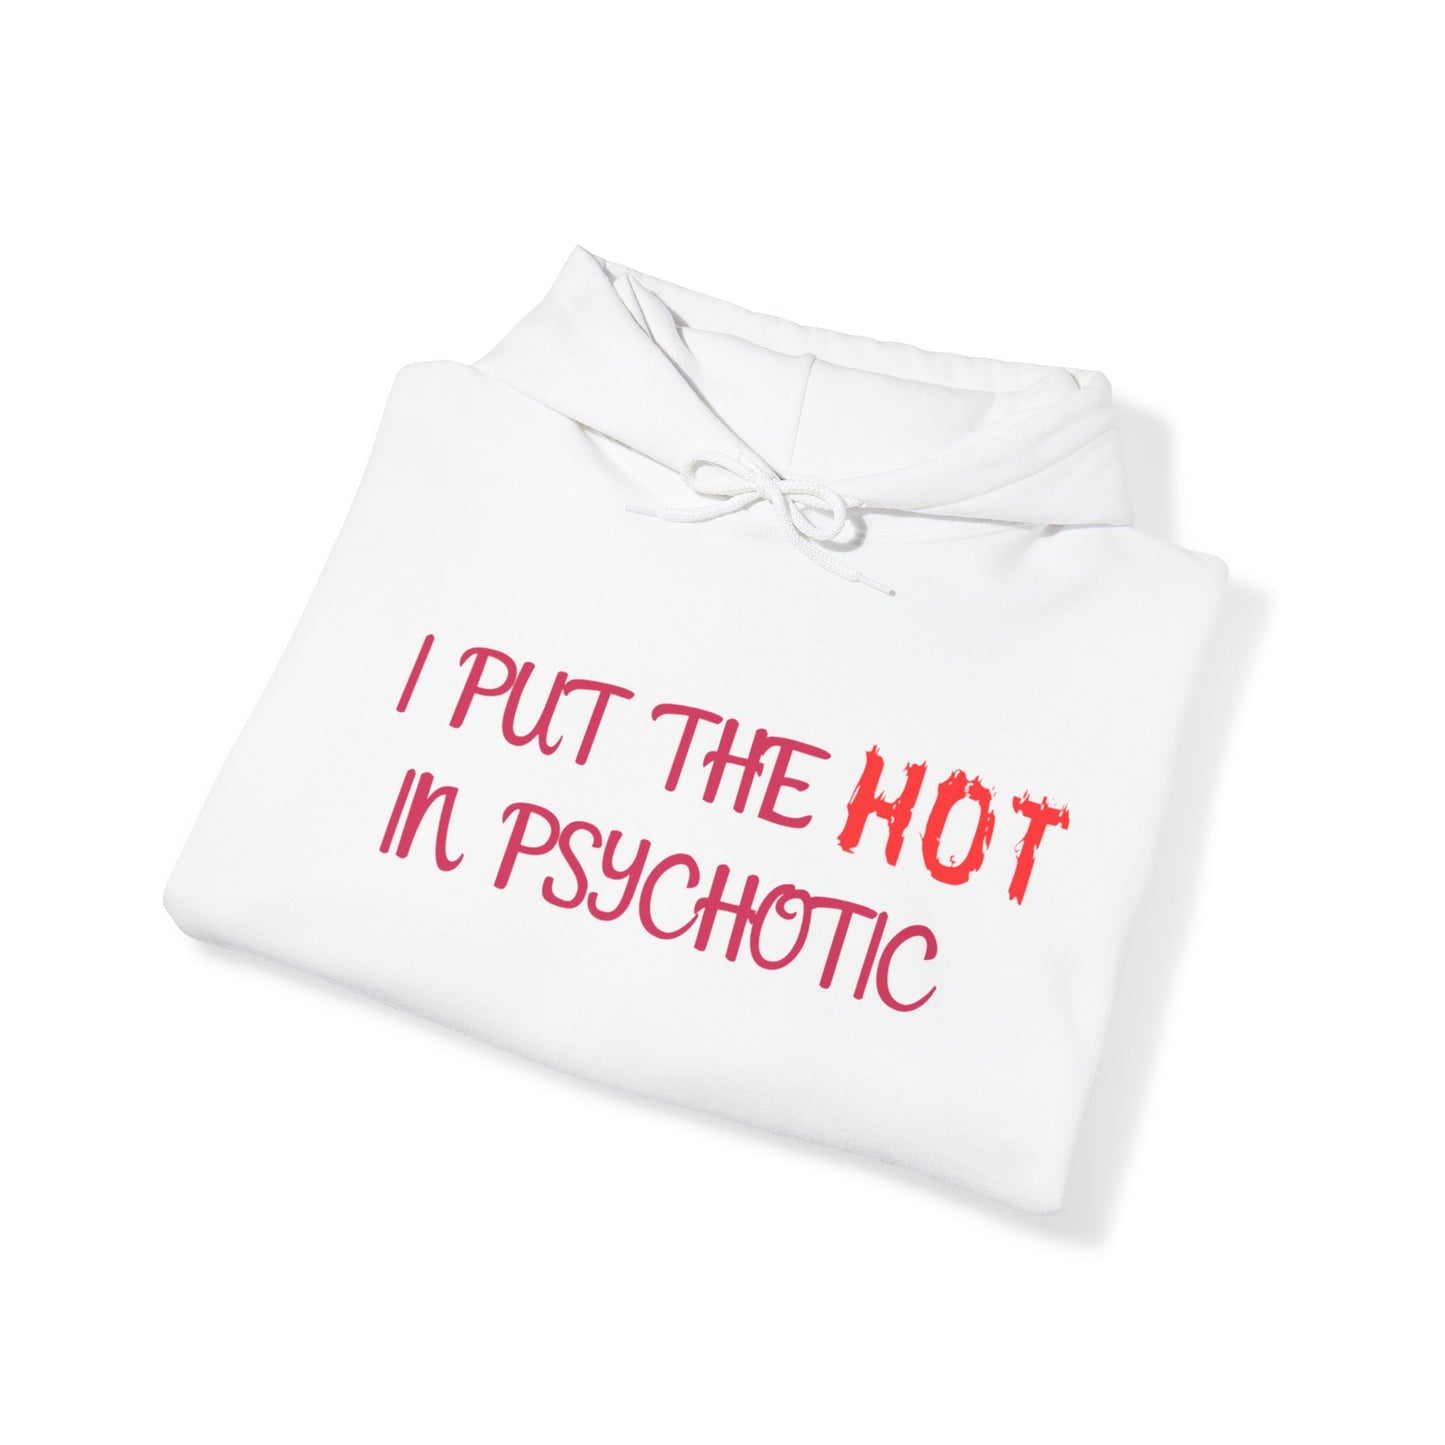 "I put the HOT in Psychotic" - Hoodie